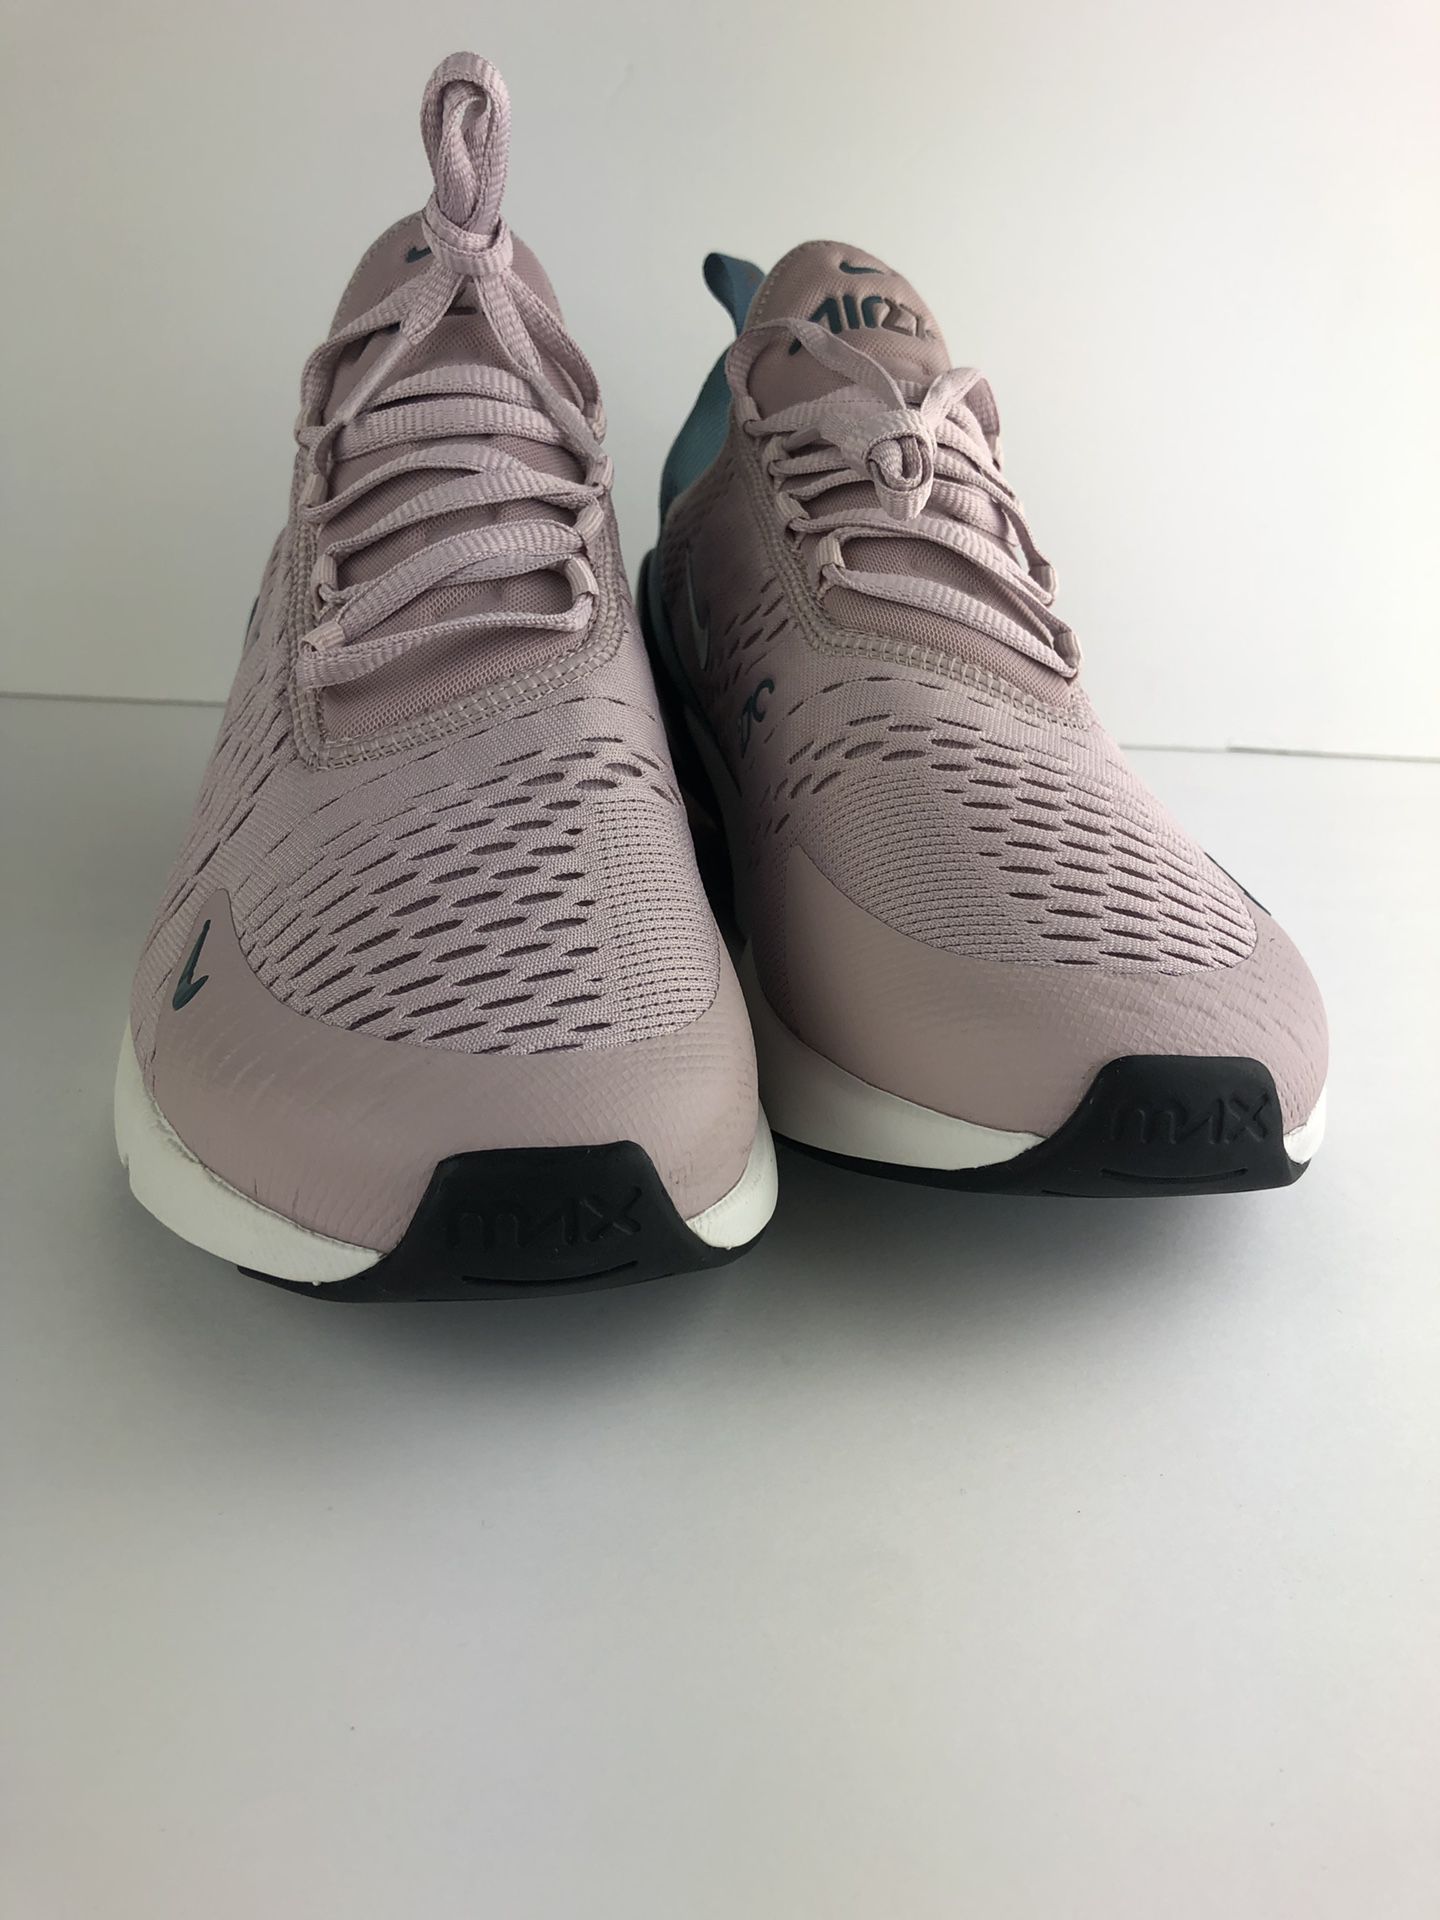 NIKE AIR MAX 270 PARTICLE ROSE CELESTIAL TEAL WOMENS SIZE 12AH6789-602 Sale in Highland, CA - OfferUp